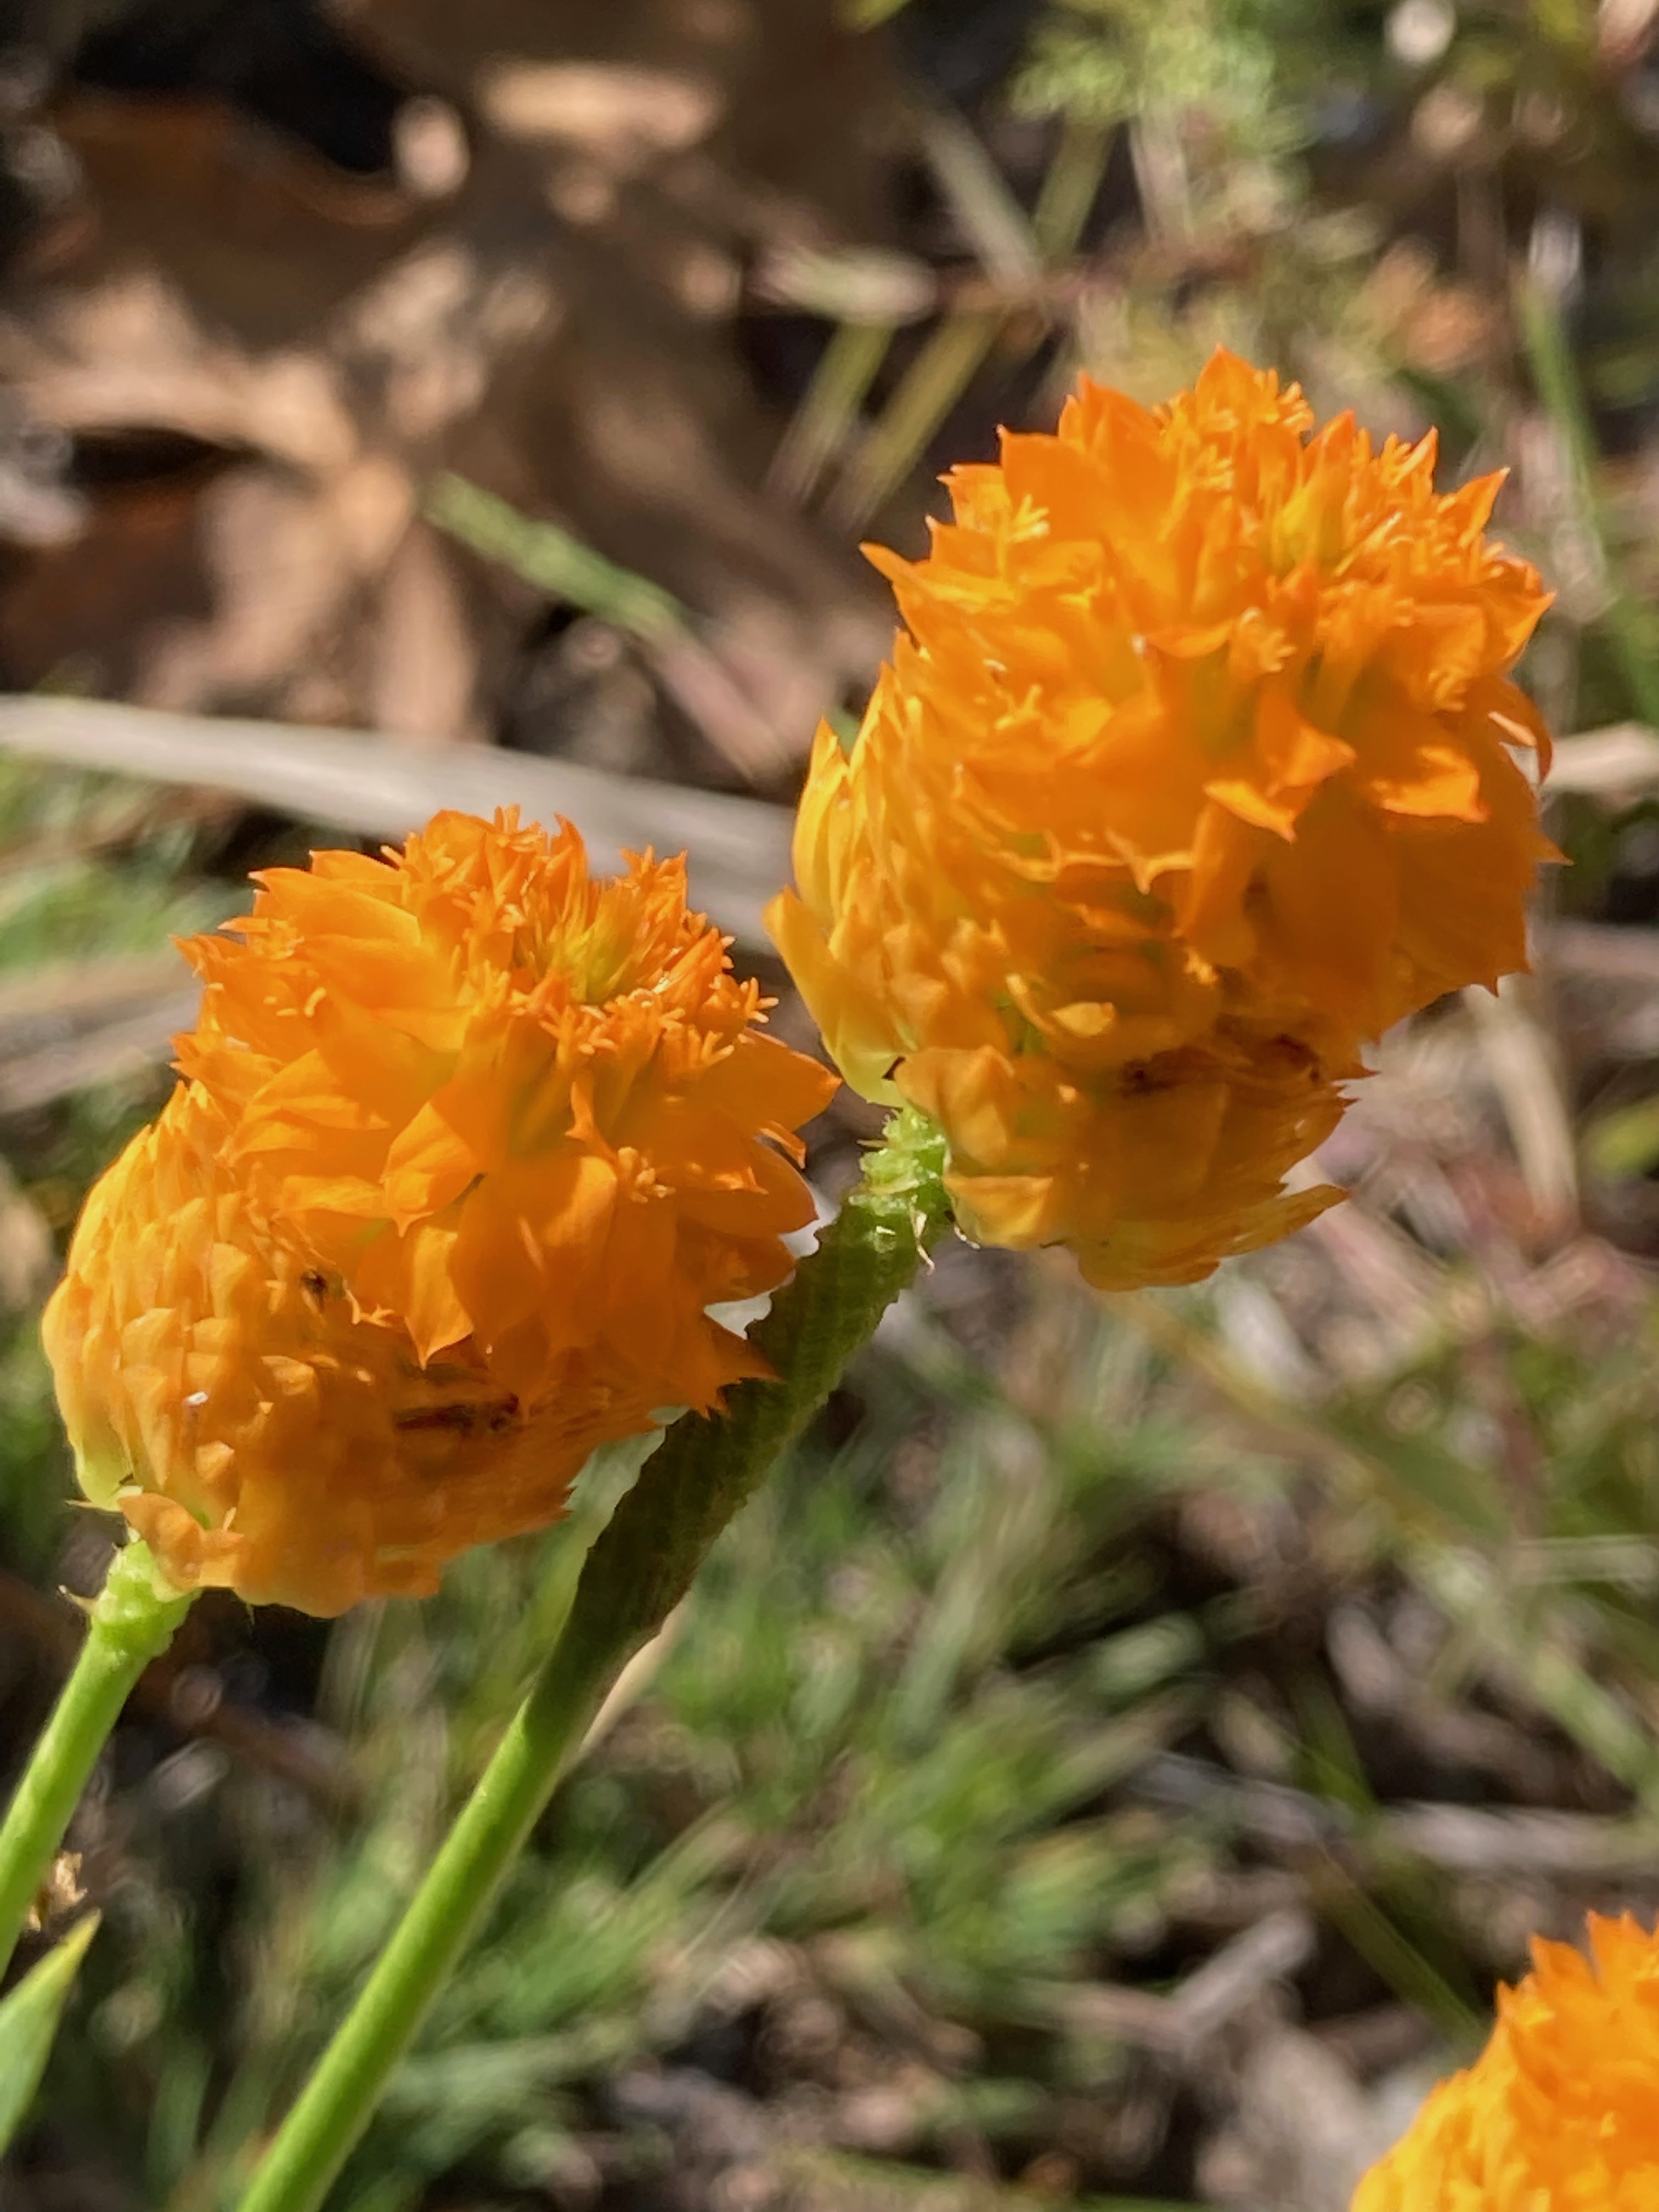 The Scientific Name is Polygala lutea. You will likely hear them called Orange Milkwort, Yellow Milkwort, Red-hot-poker, Candy Weed, Candyroot. This picture shows the Flower head of bright orange flowers. of Polygala lutea